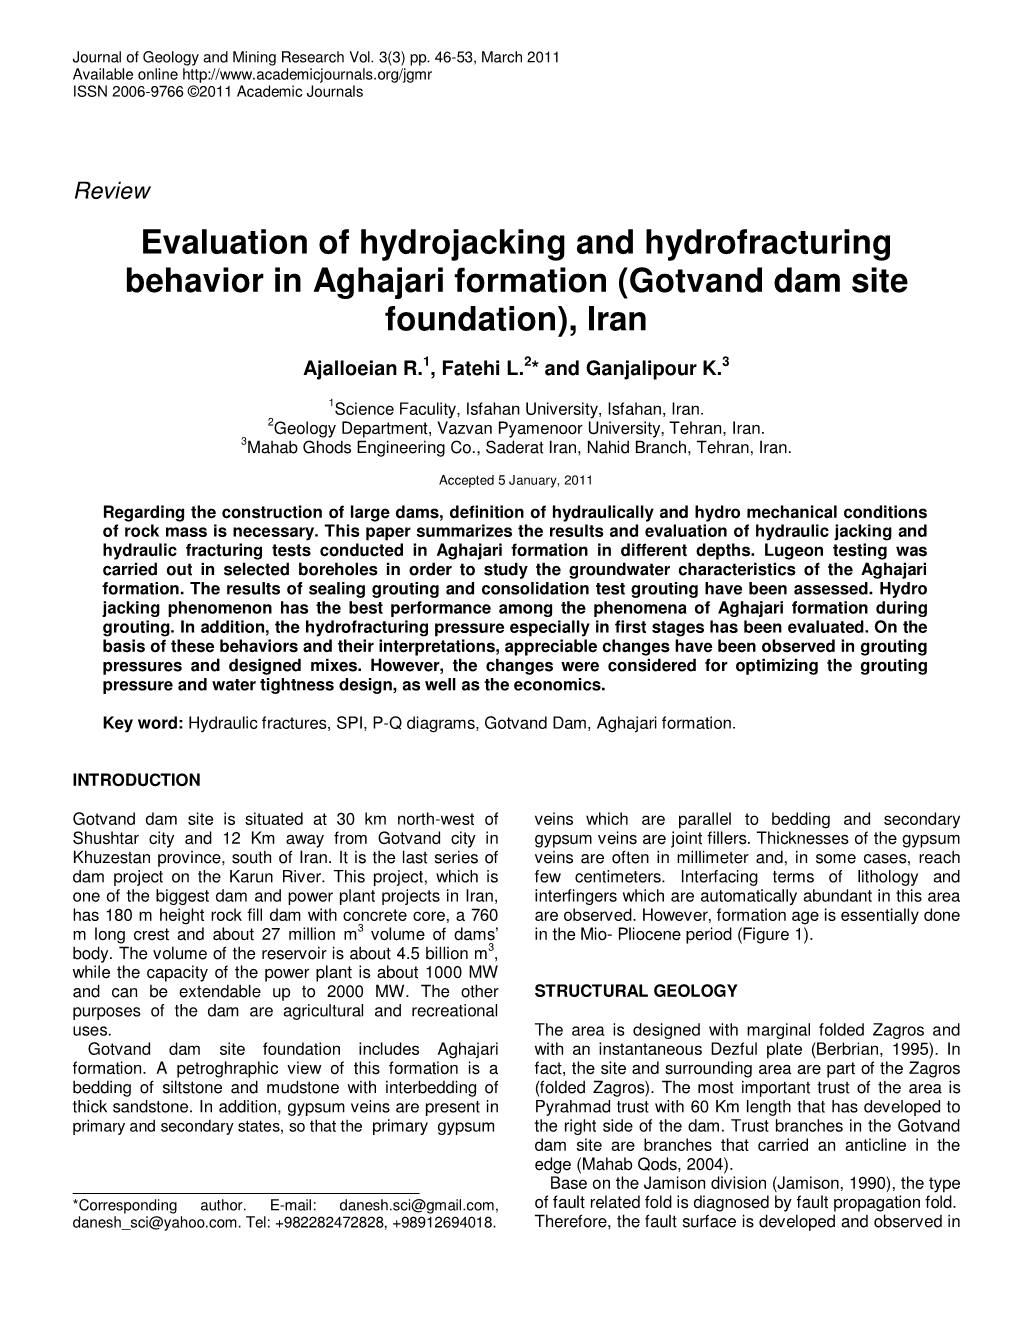 Evaluation of Hydrojacking and Hydrofracturing Behavior in Aghajari Formation (Gotvand Dam Site Foundation), Iran